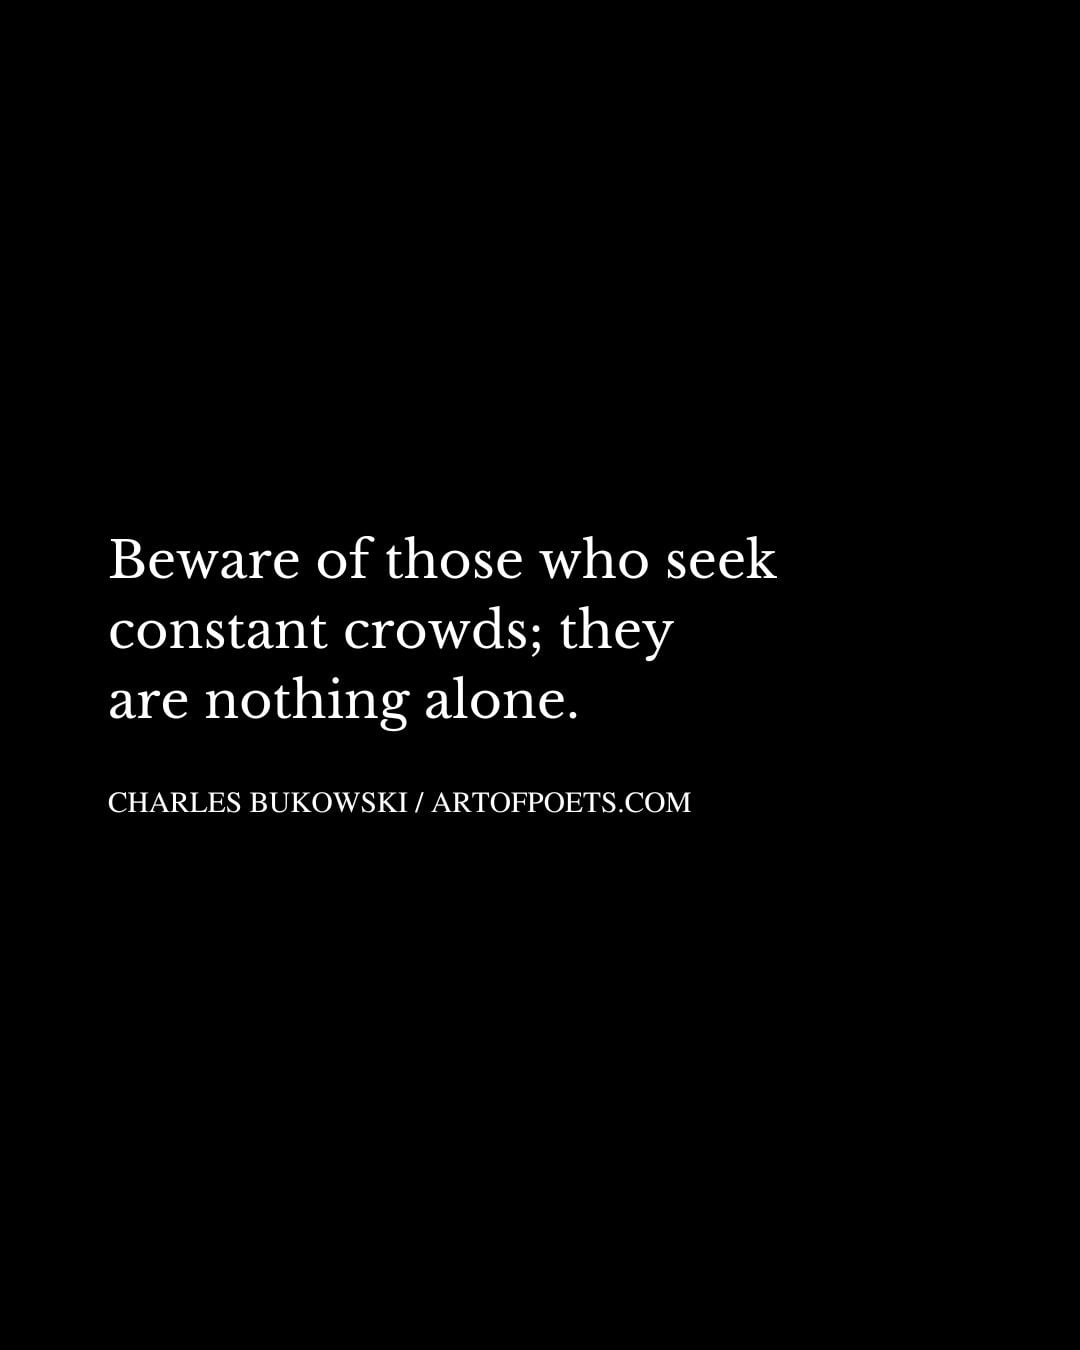 Beware of those who seek constant crowds they are nothing alone